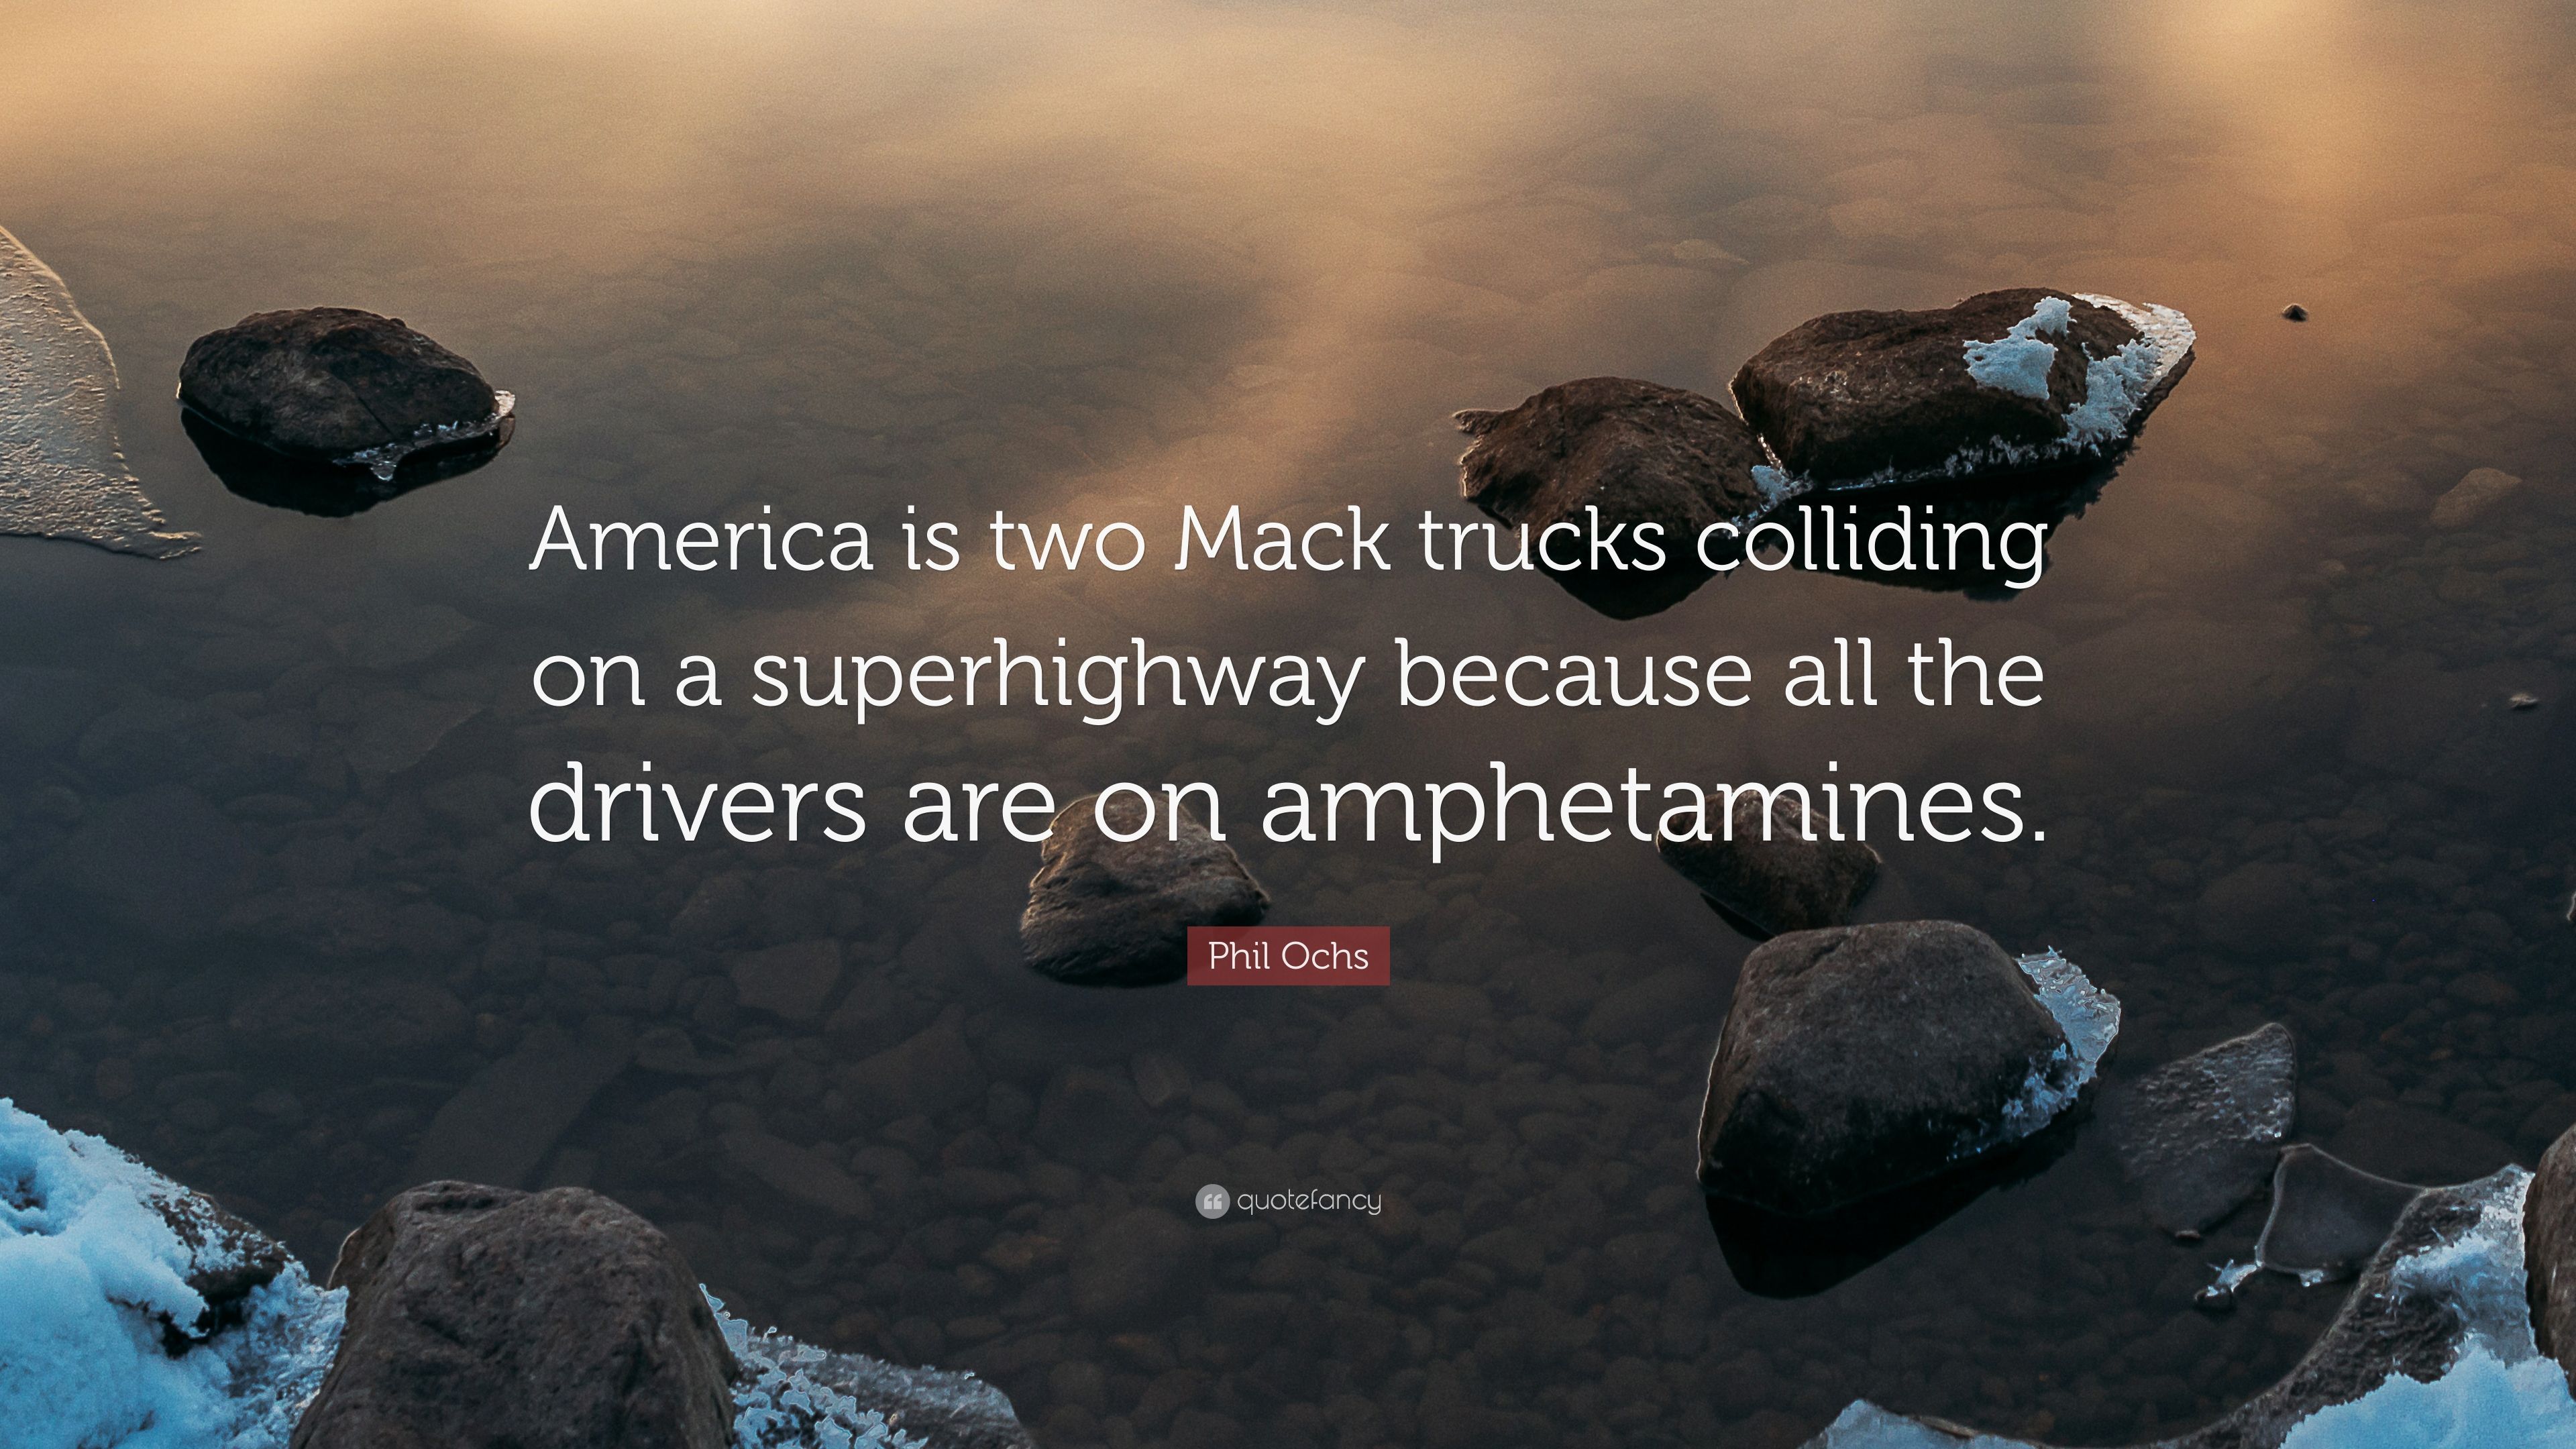 Phil Ochs Quote: “America is two Mack trucks colliding on a superhighway because all the drivers are on amphetamines.” (7 wallpaper)